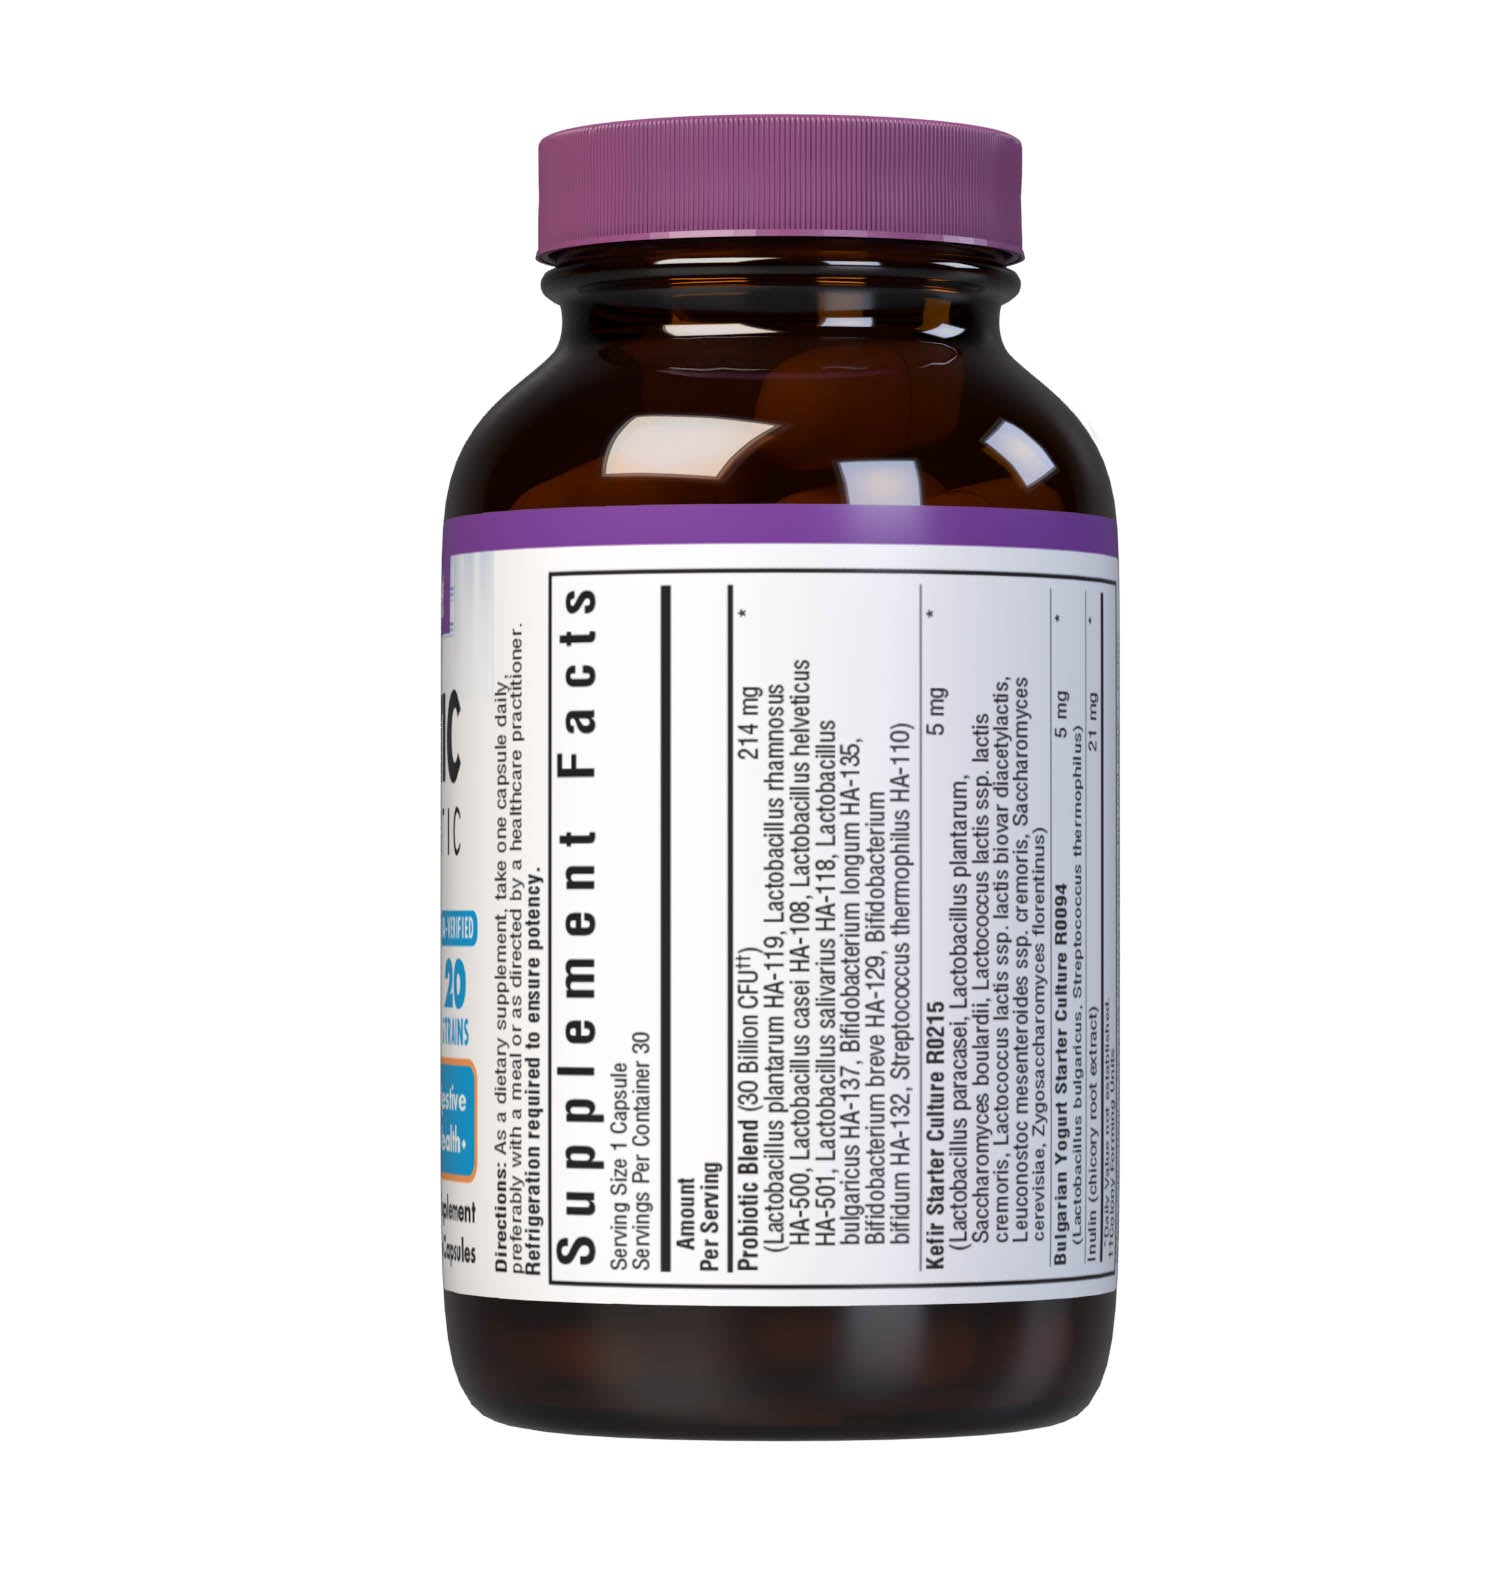 Bluebonnet’s Probiotic & Prebiotic 30 Vegetable Capsules are formulated with 30 billion viable cultures from 20 DNA-verified, scientifically supported strains. This unique, science-based probiotic formula includes the prebiotic inulin from chicory root extract, to assist the growth of friendly bacterium in the gut. Supplement facts panel 1. #size_30 count